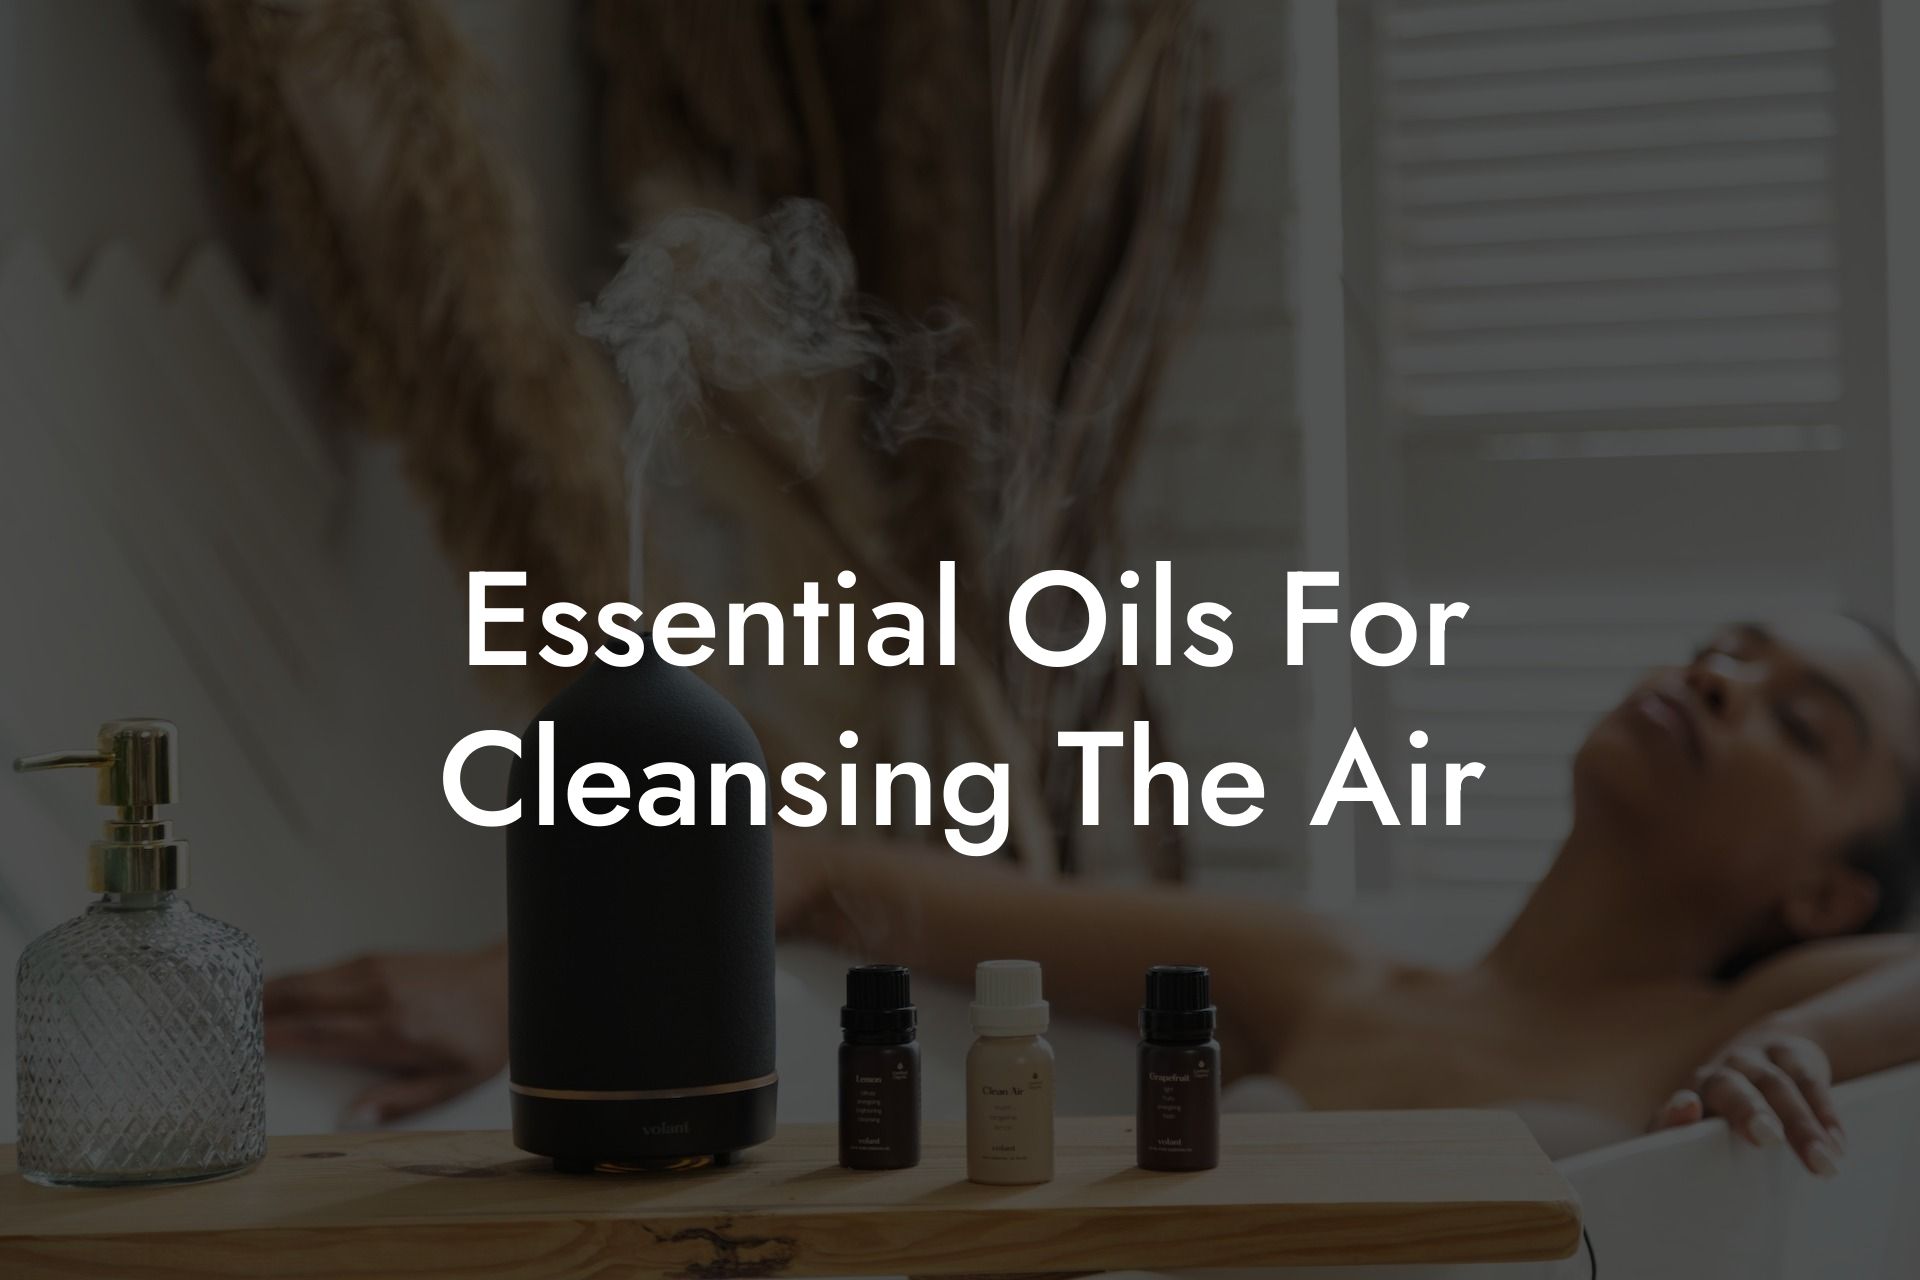 Essential Oils For Cleansing The Air